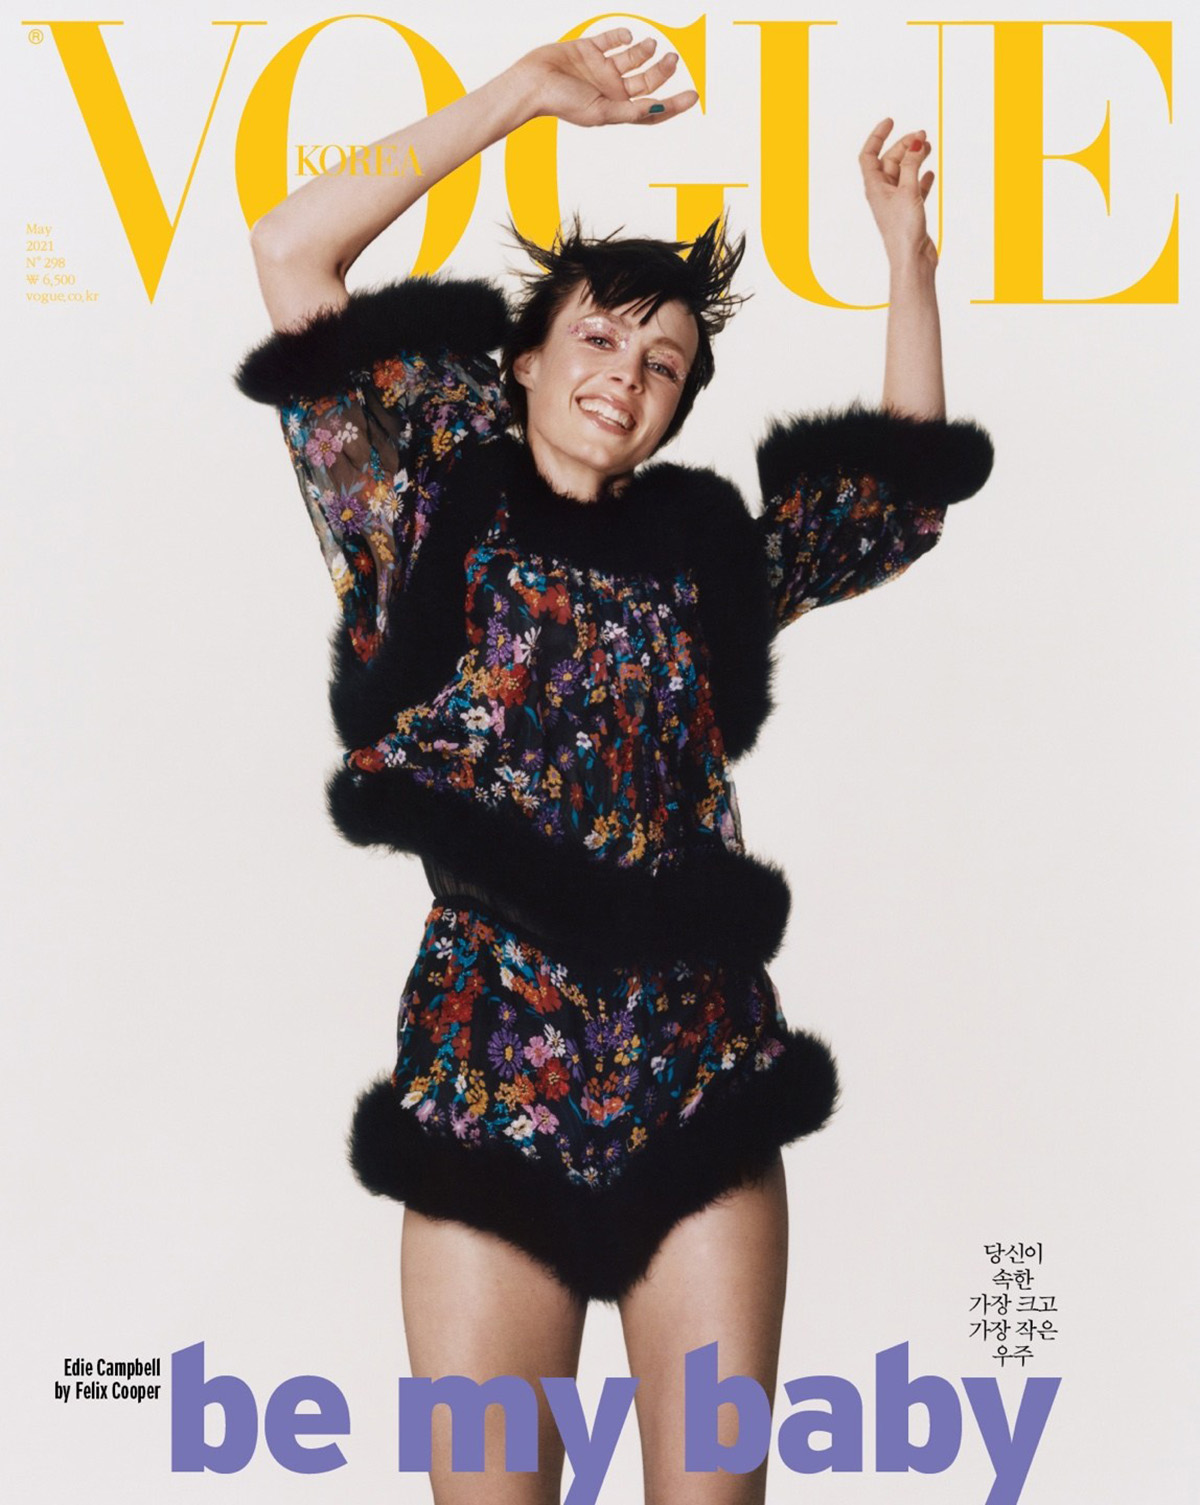 Edie Campbell in Saint Laurent on Vogue Korea May 2021 cover by Felix Cooper